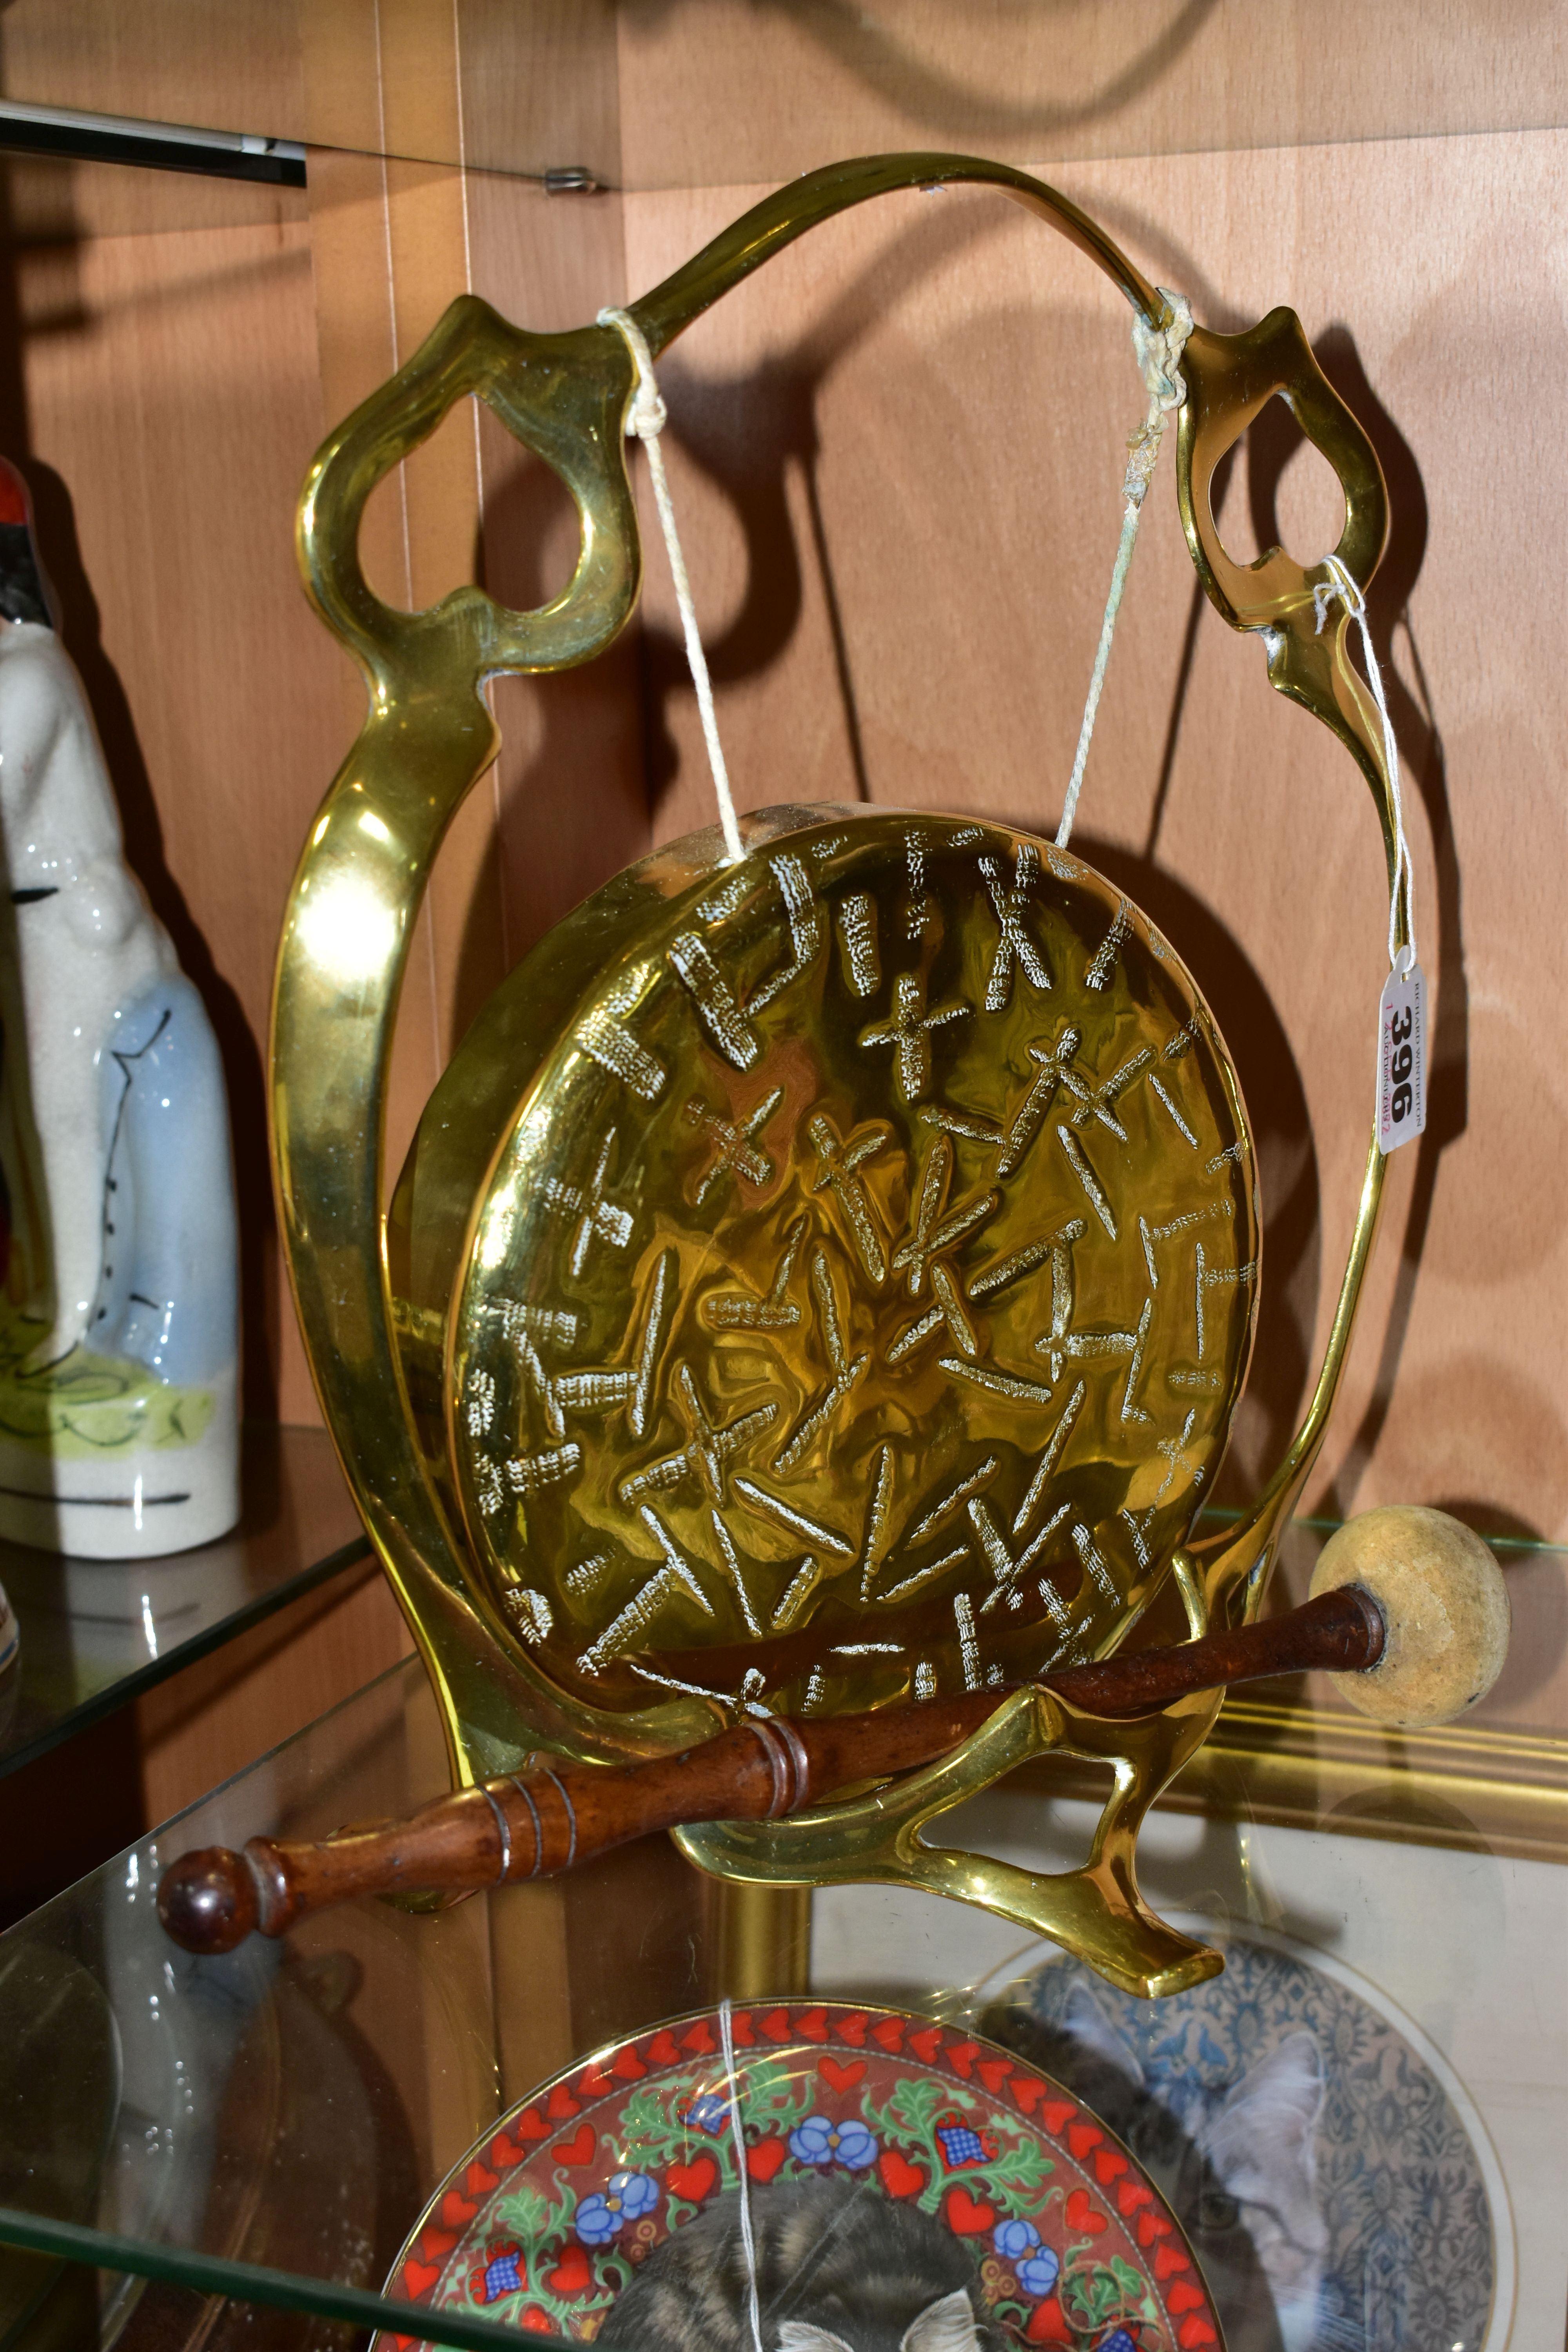 A BRASS TABLE GONG, suspended from a brass frame, with wooden handled beater, frame is stamped